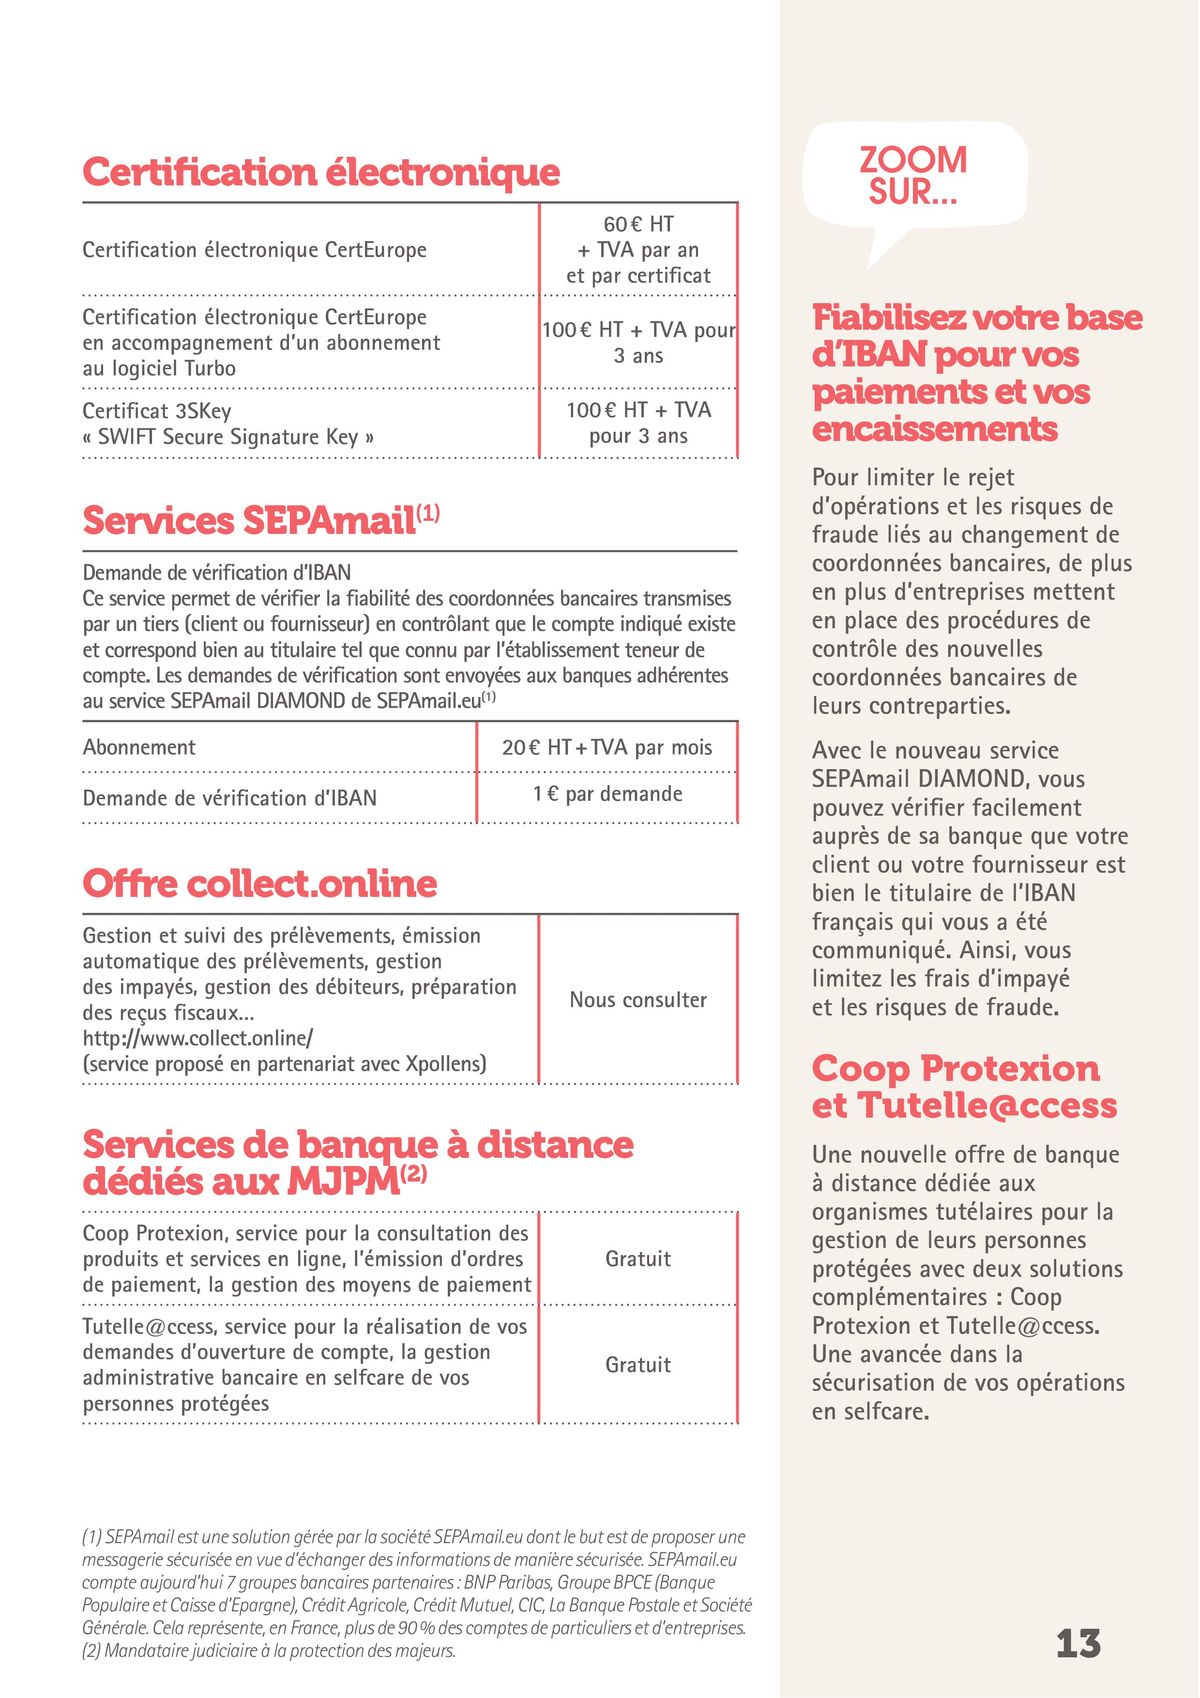 Catalogue Credit Cooperatif Guide tarifs bancaires 2023, page 00013